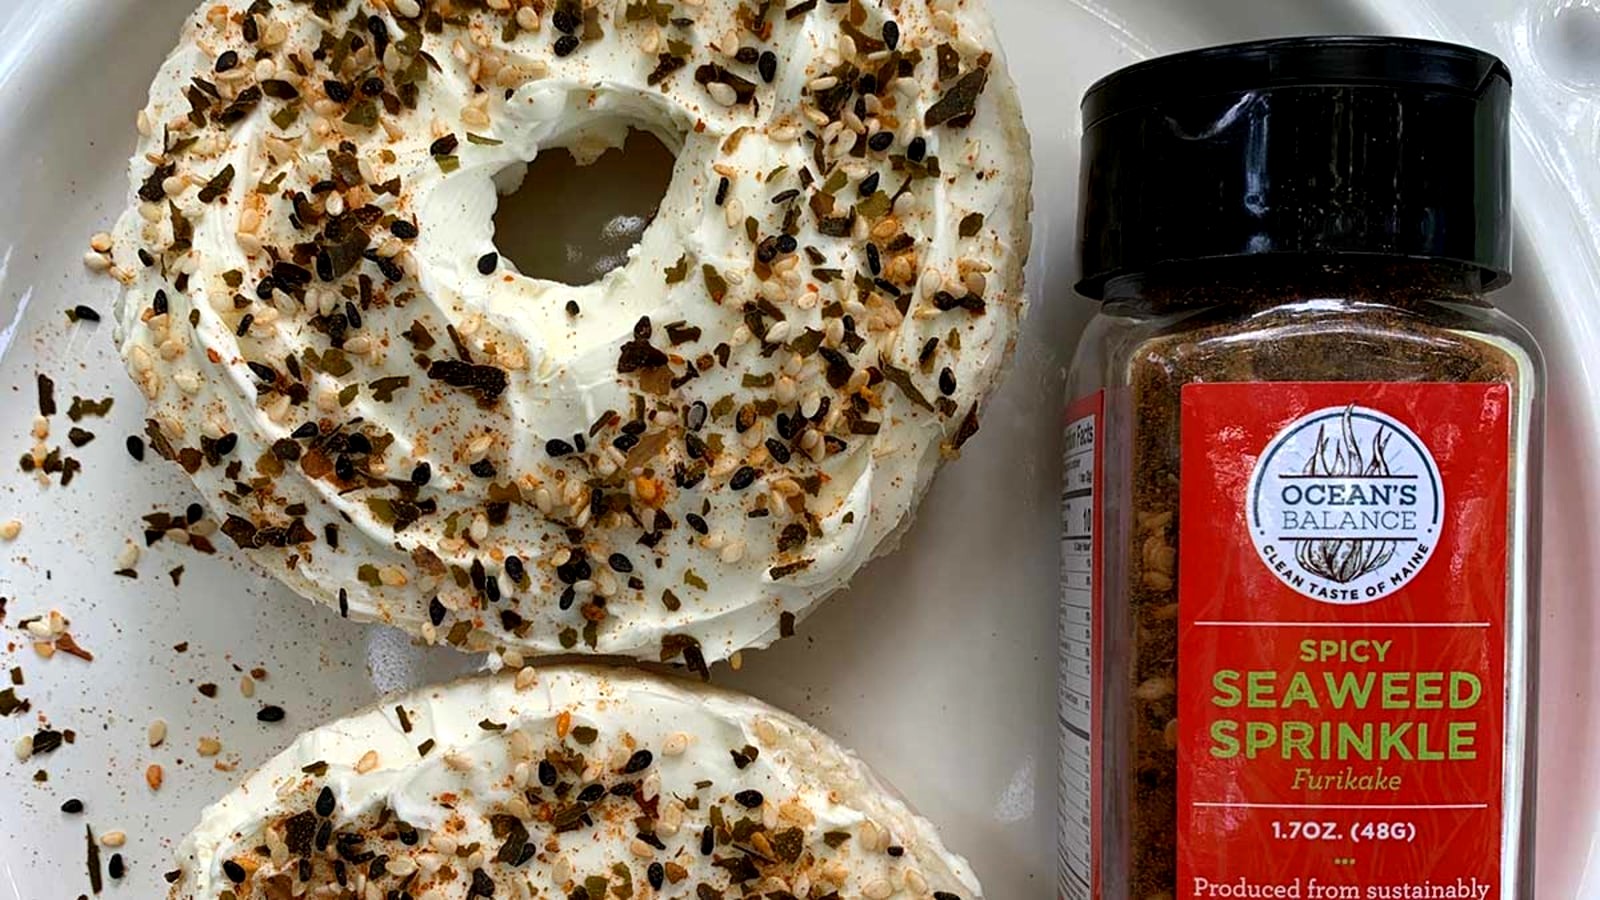 Image of Bagel with Cream Cheese and Seaweed Sprinkles